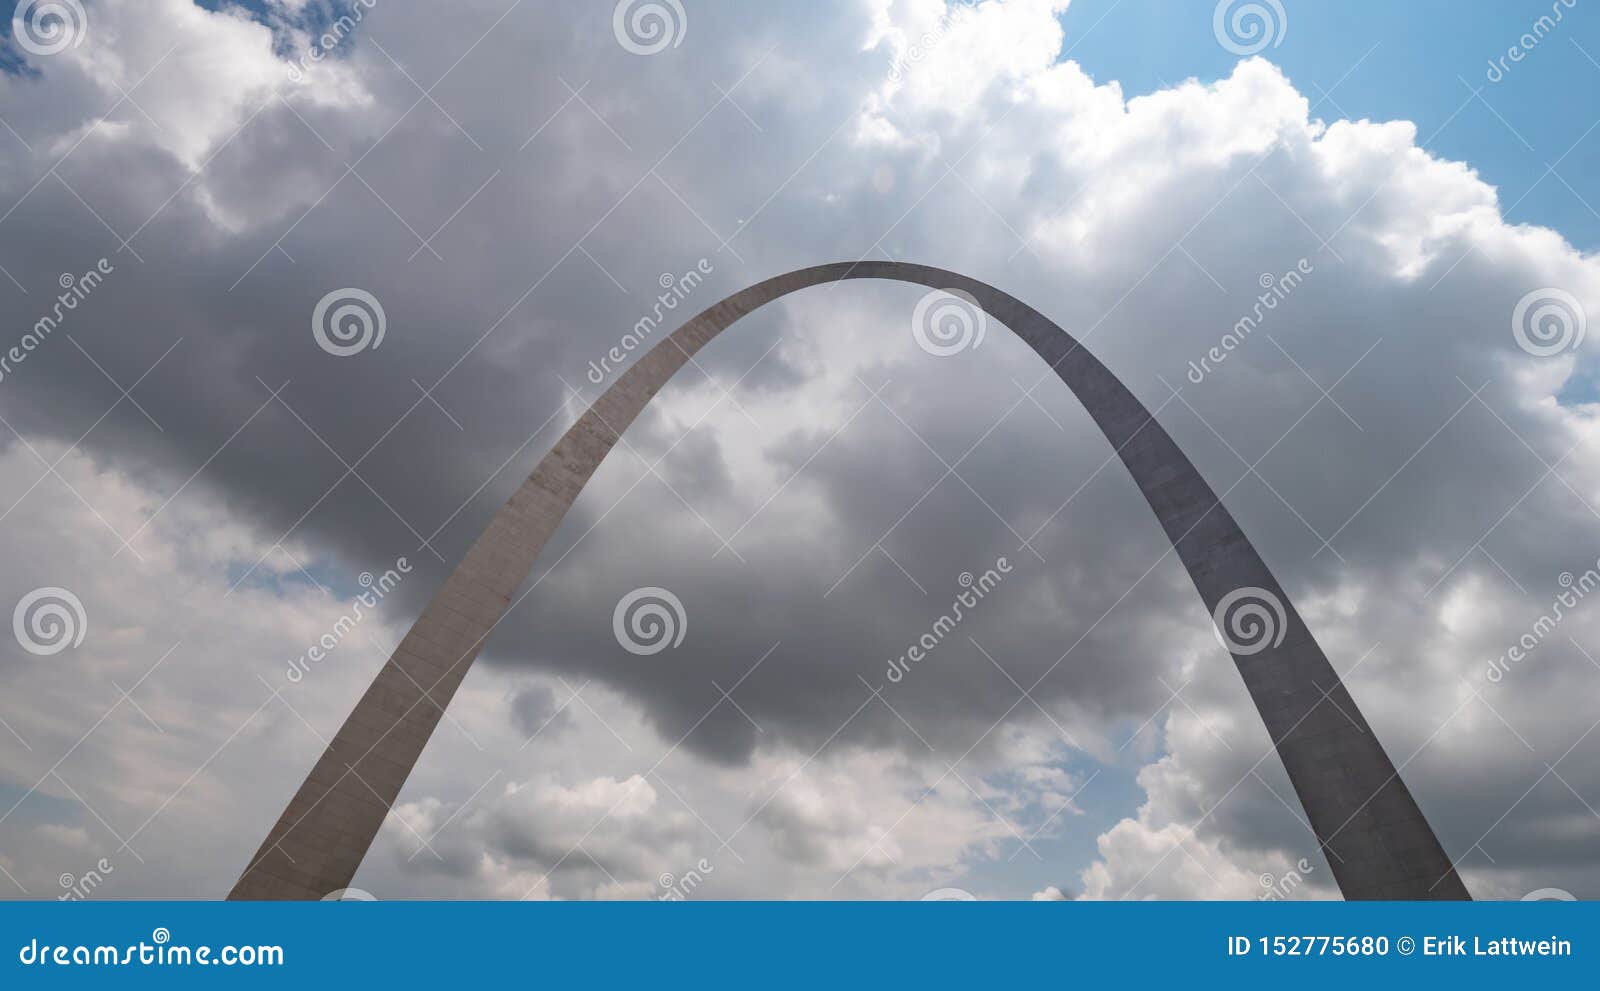 Famous Gateway Arch In St. Louis - ST. LOUIS, USA - JUNE 19, 2019 Editorial Image - Image of ...